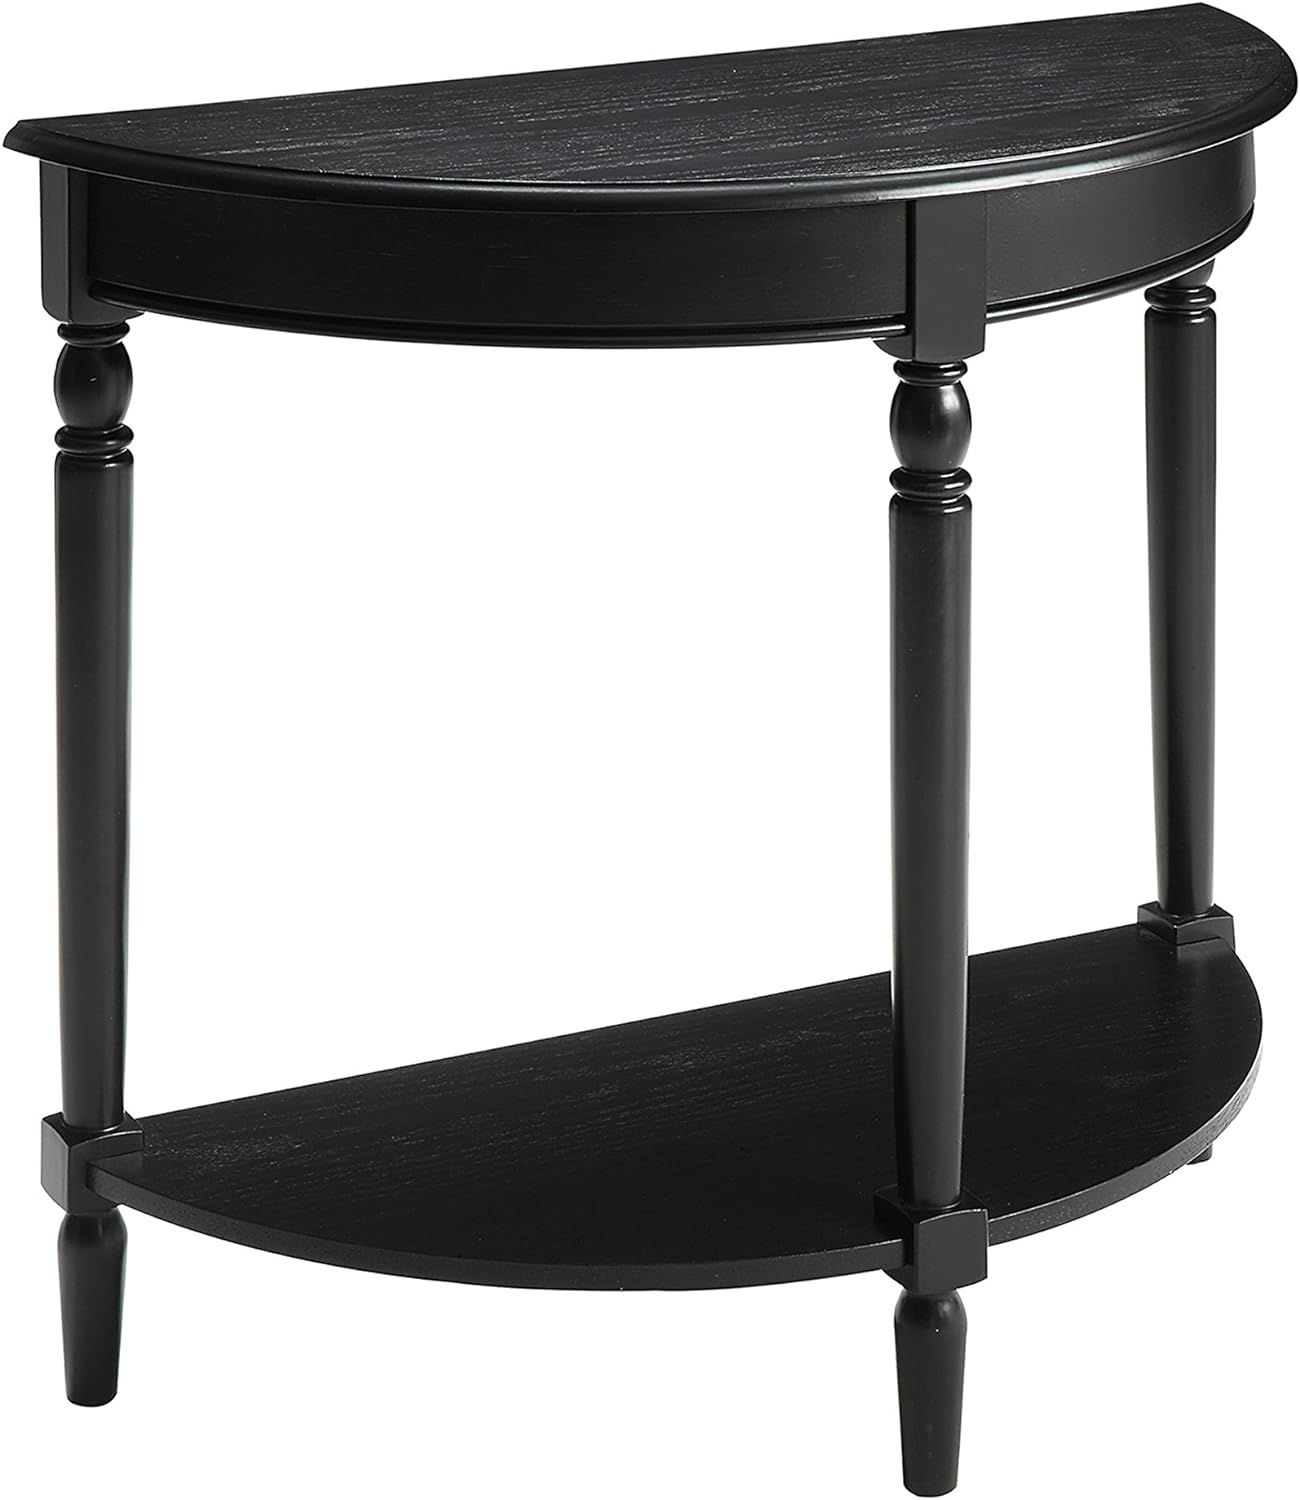 Convenience Concepts French Country Half-Round Entryway Table with Shelf, Black | Amazon (US)